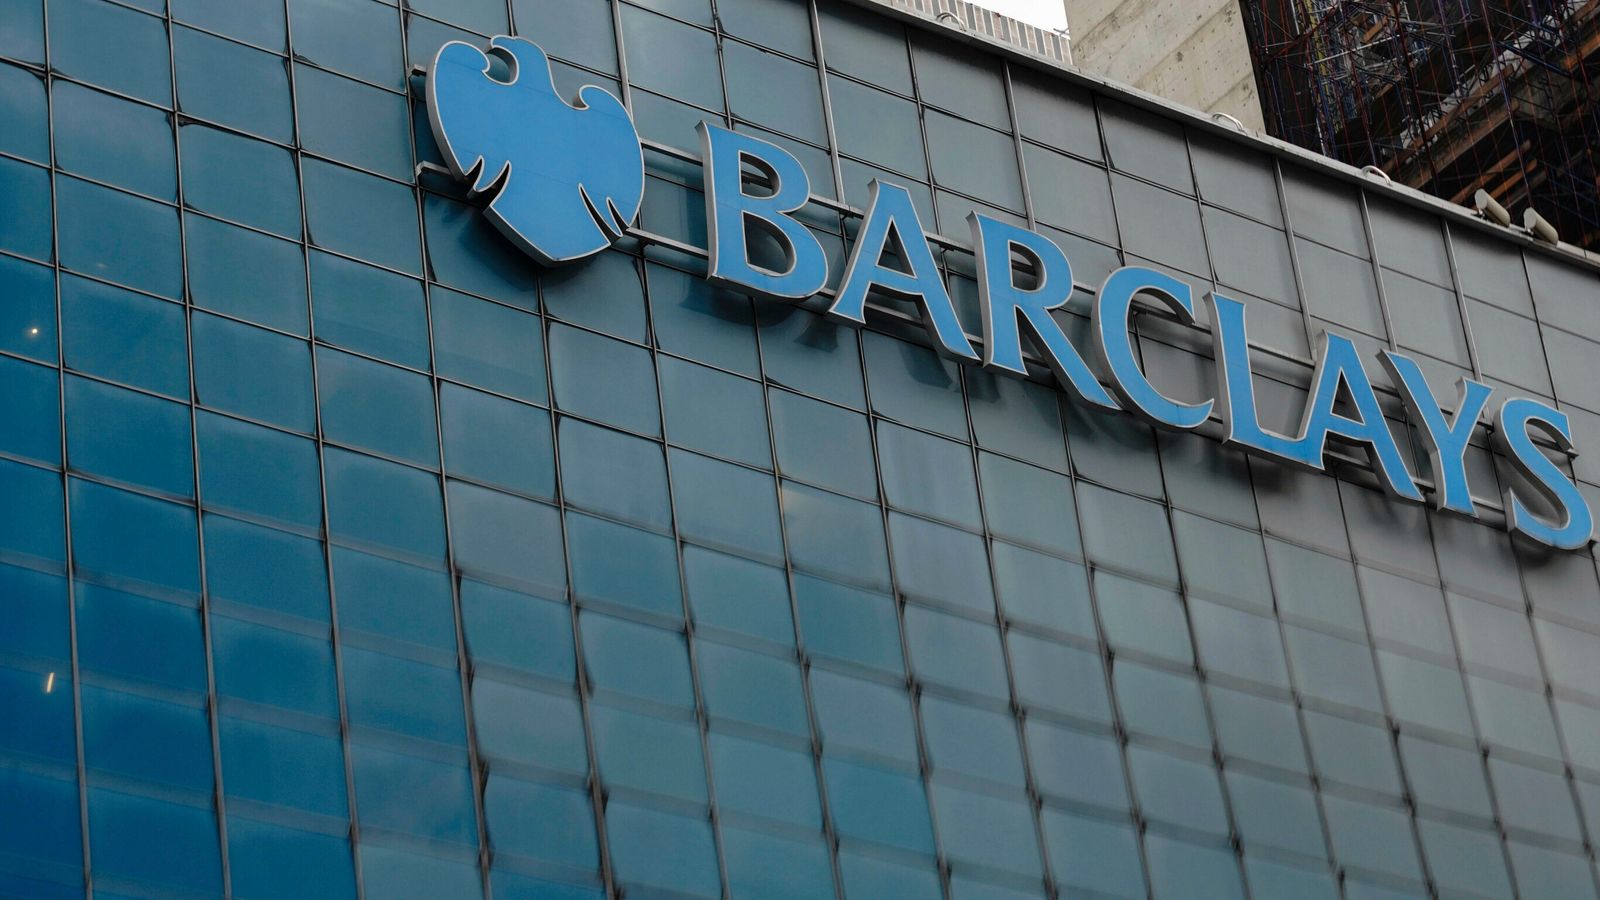 Barclays lend less to mortgage seekers after Truss mini-budget